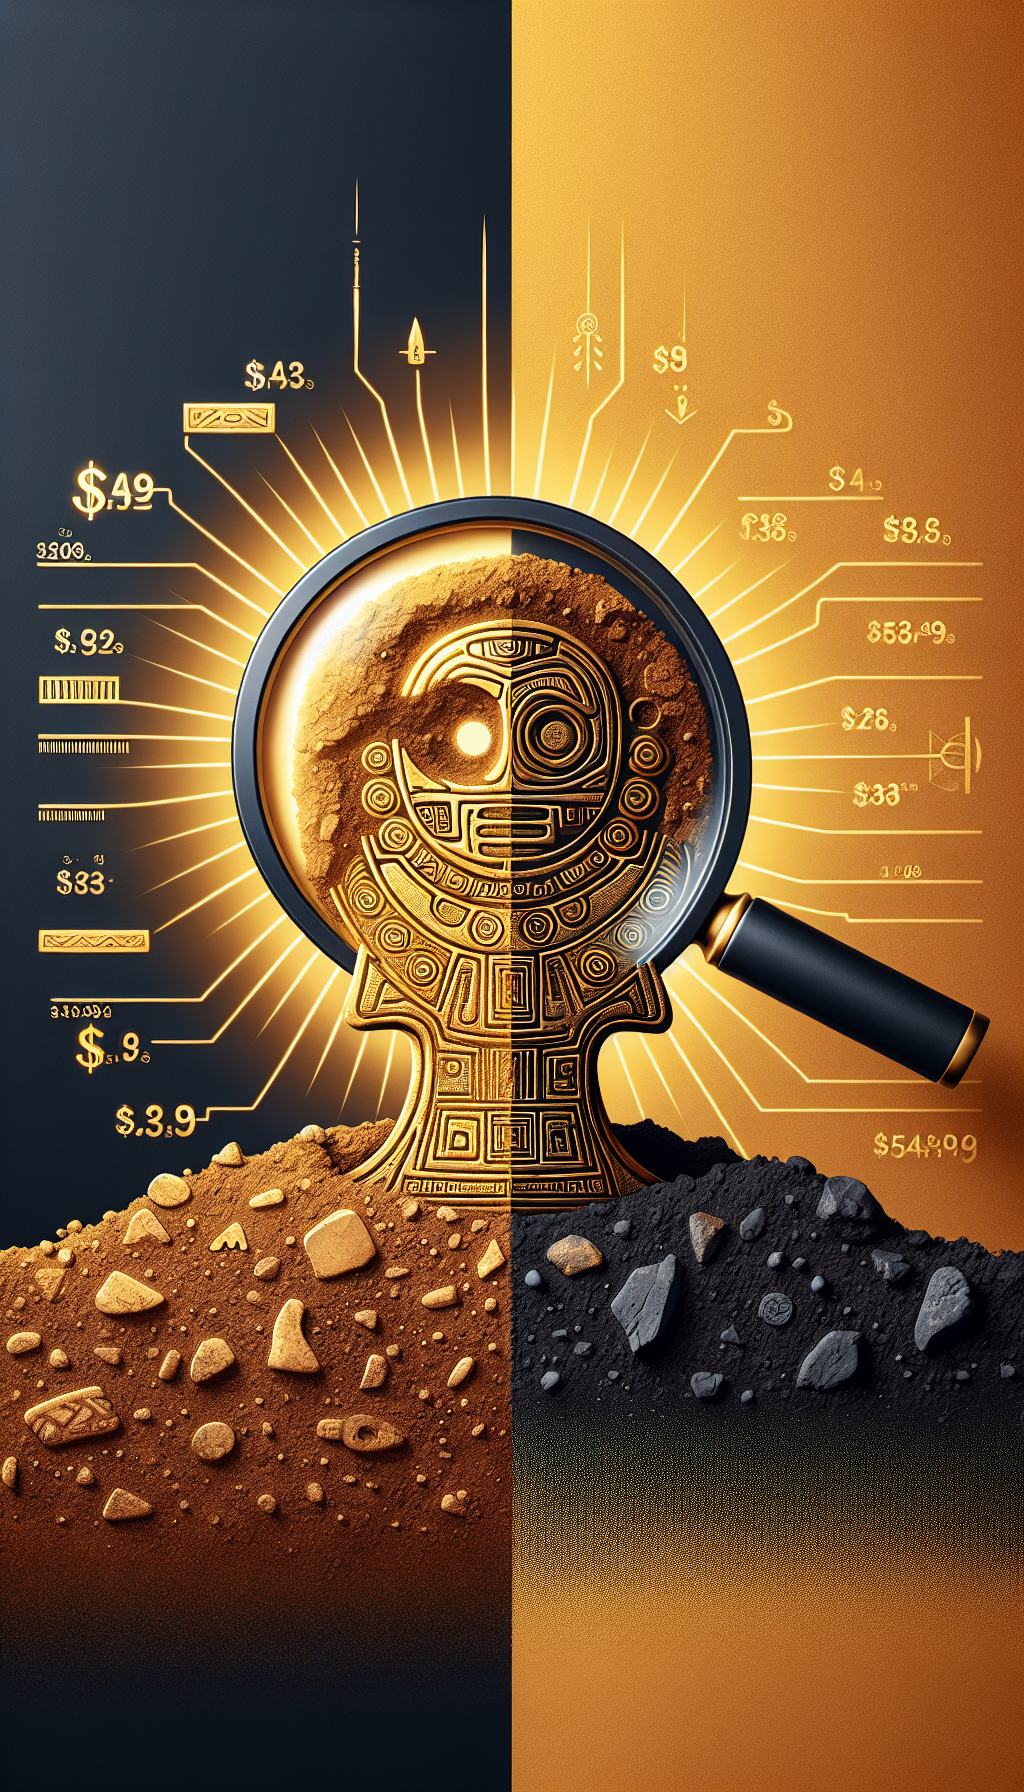 A vibrant, split-style illustration shows a stylized Pre-Columbian artifact half-buried in the ground with a magnifying glass above, revealing a golden glow and a price tag surrounded by auction bids and prestigious gallery logos, contrasting with the other half in a museum display, symbolizing the dramatic rise in value through provenance discovery.